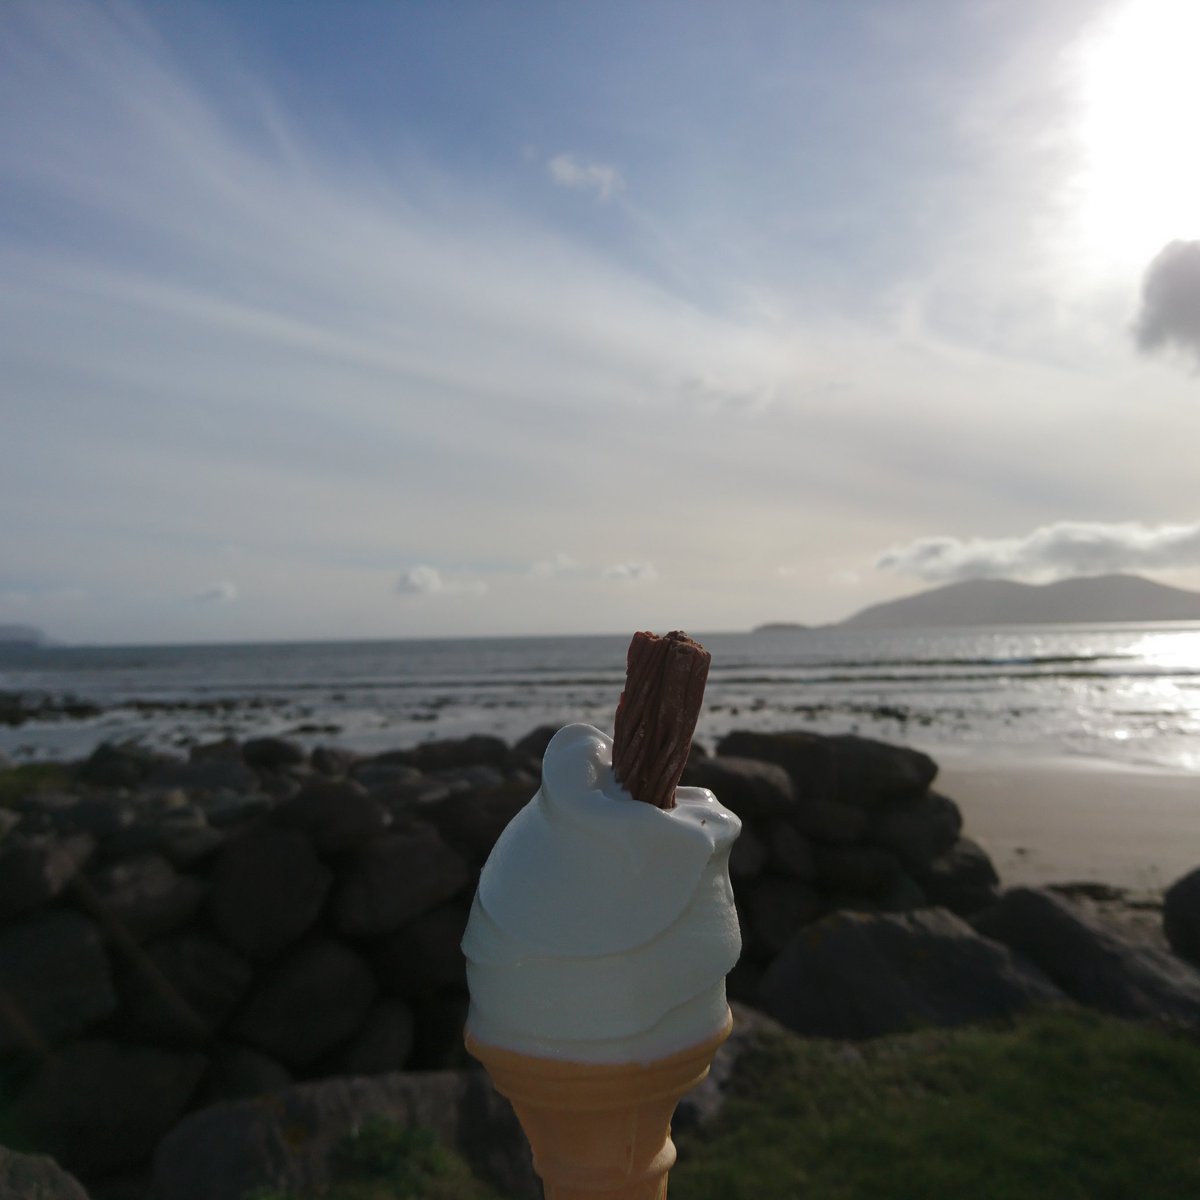 There's nothing like celebrating the sunshine ☀ with a 99 ice cream cone! 😊 .. #visitwaterville #watervilleireland #skelligcoast #ringofkerry #wildatlanticway #ireland #blueskyday #kerryireland #watervillekerry